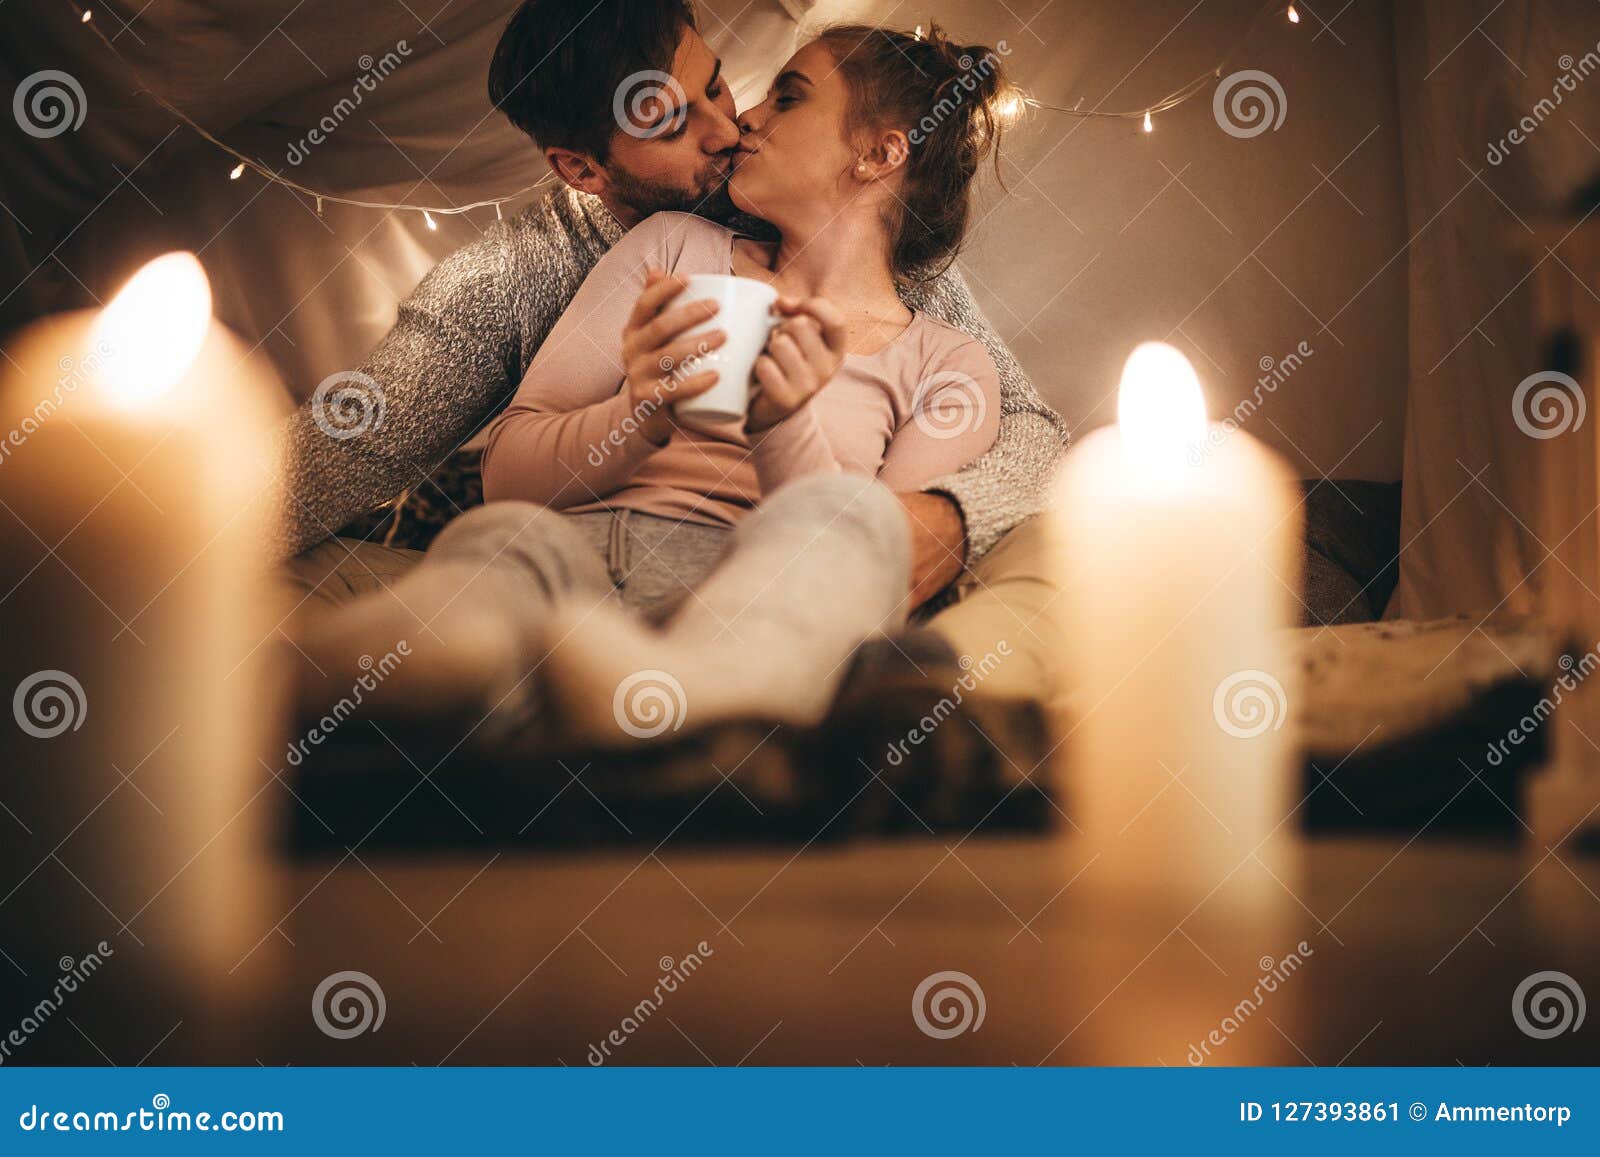 Romantic Couple Kissing Each Other Sitting on Bed Stock Image ...